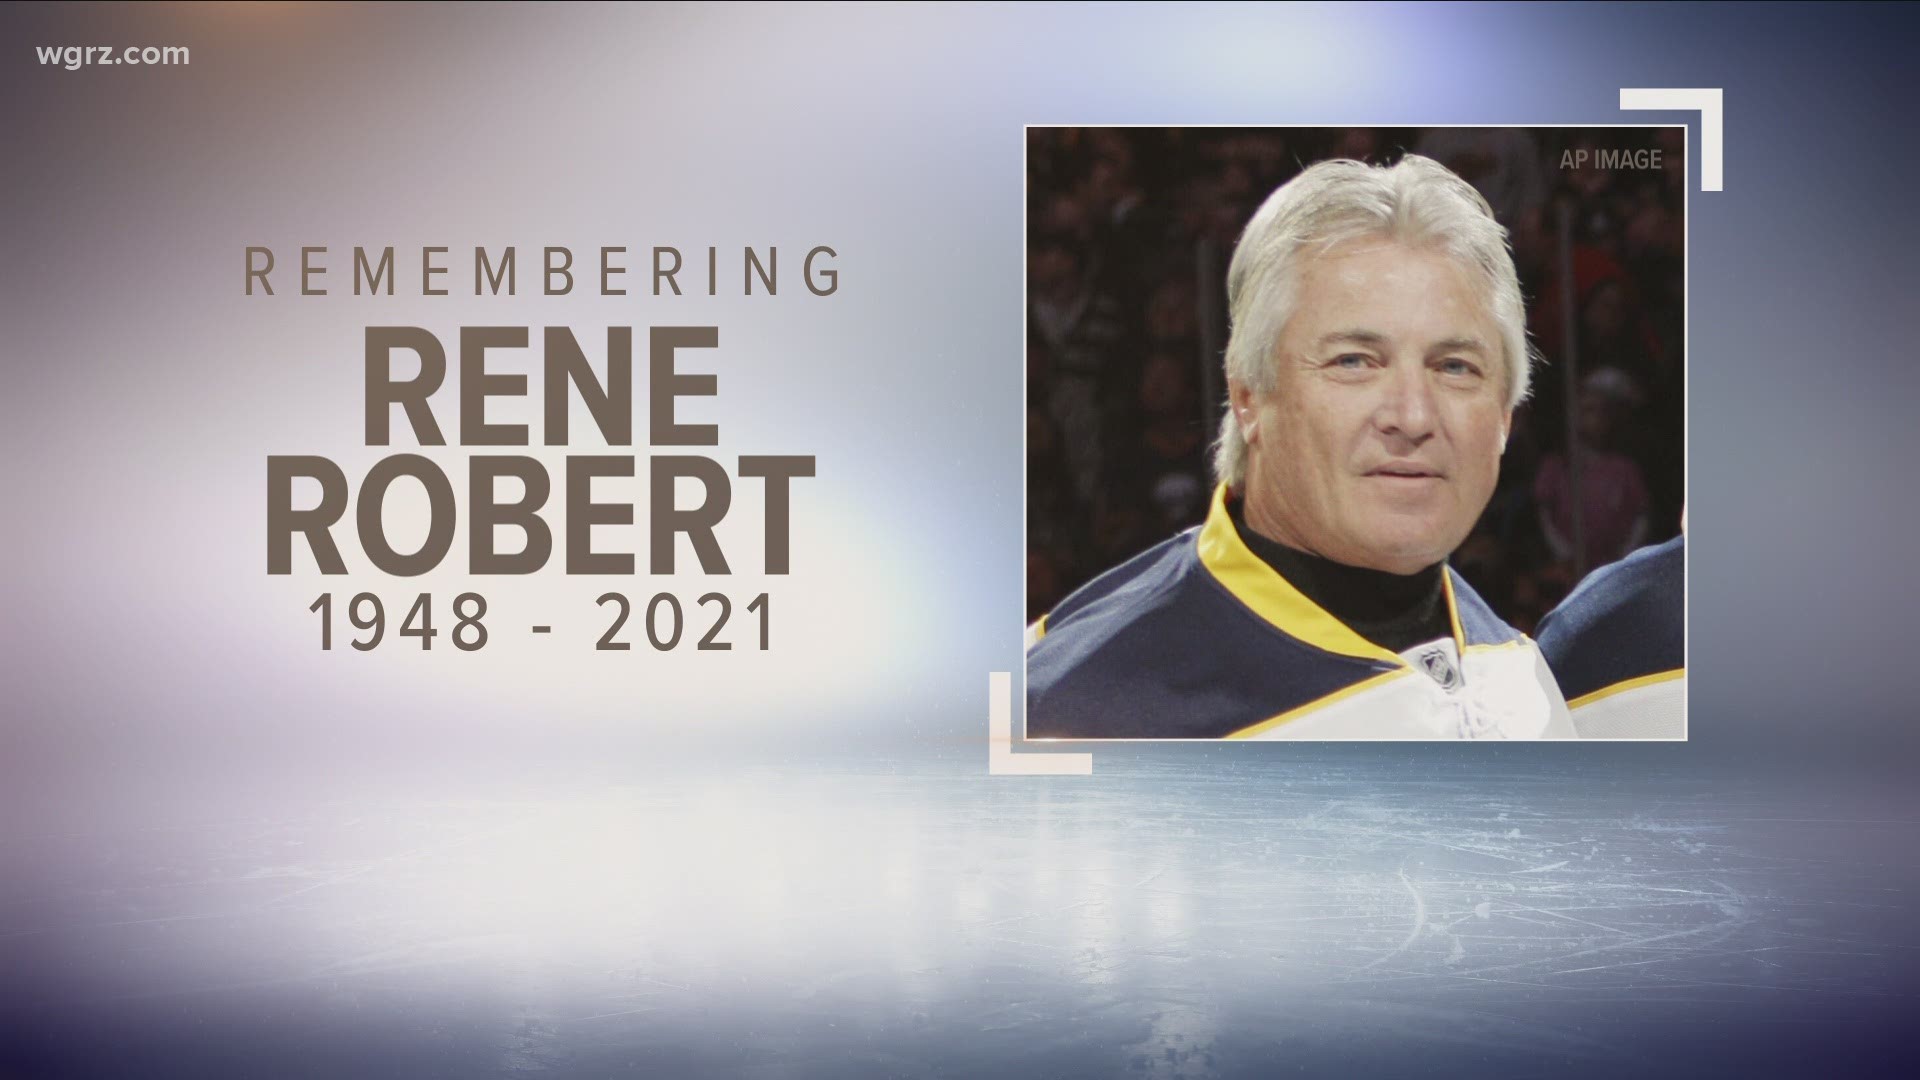 The Sabres saying in a tweet,  that the entire Sabres organization and Western New York community are praying for the Robert family.